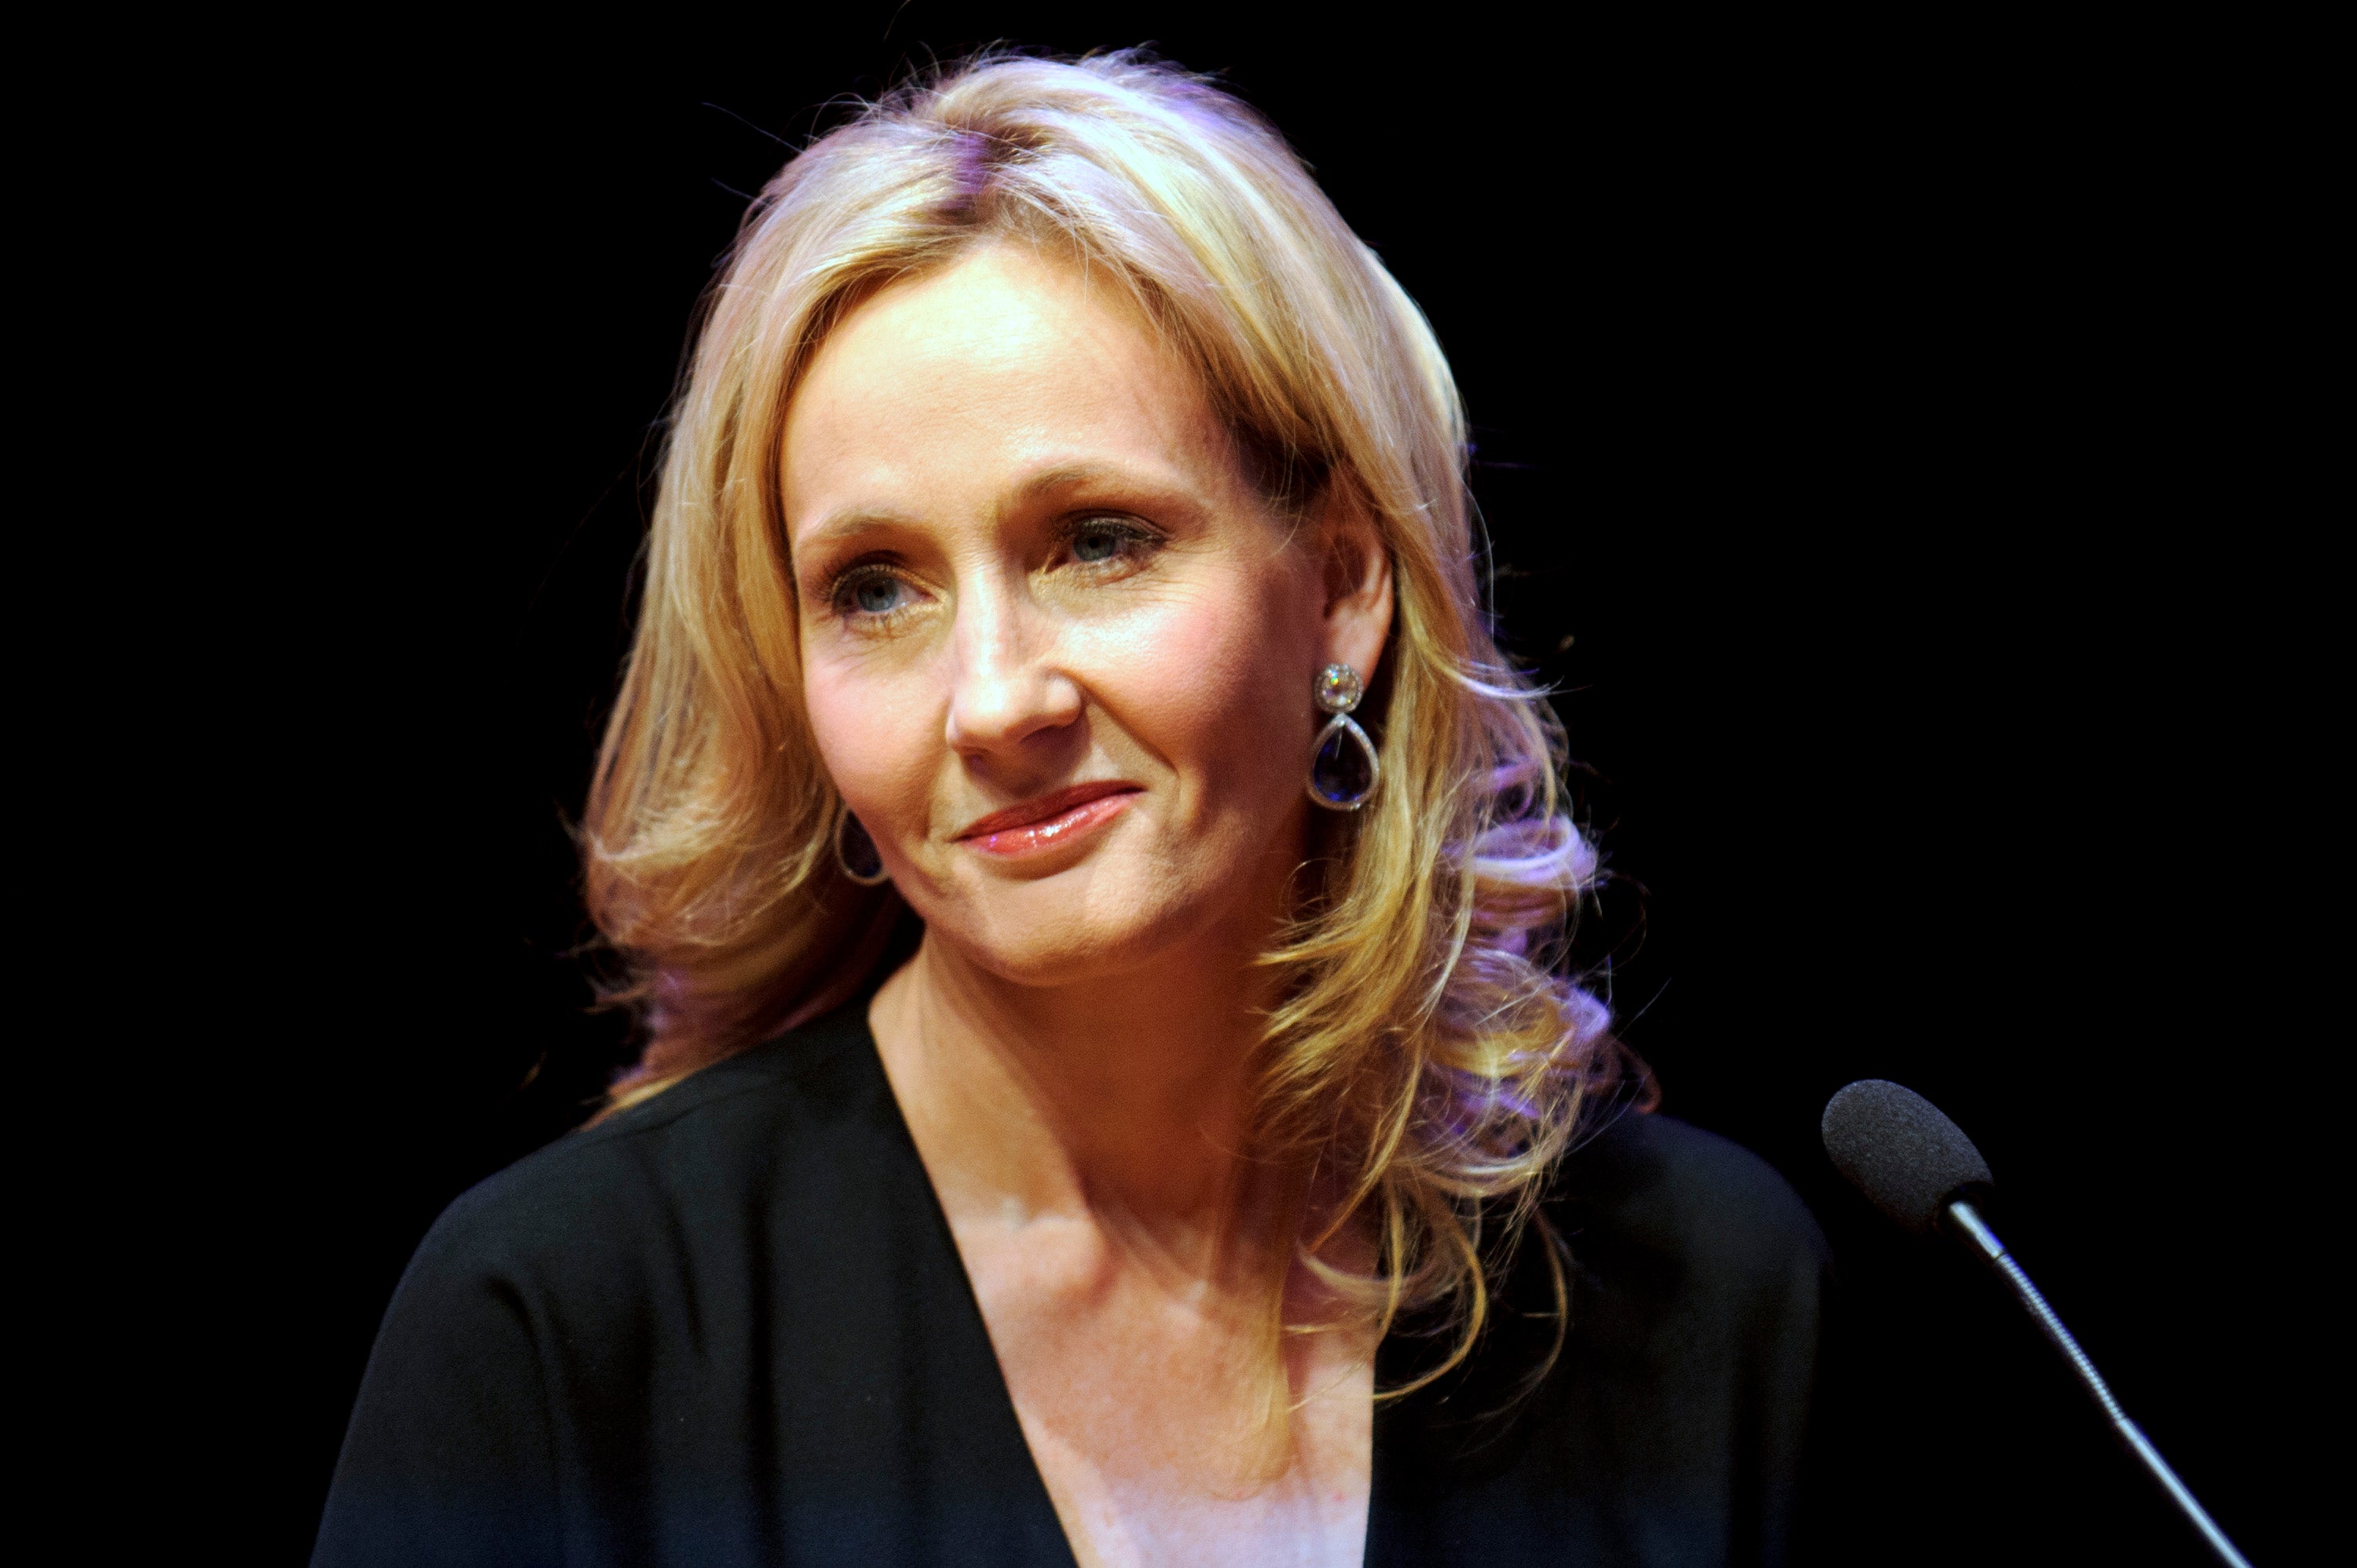 JK Rowling has continuously criticised gender ideology